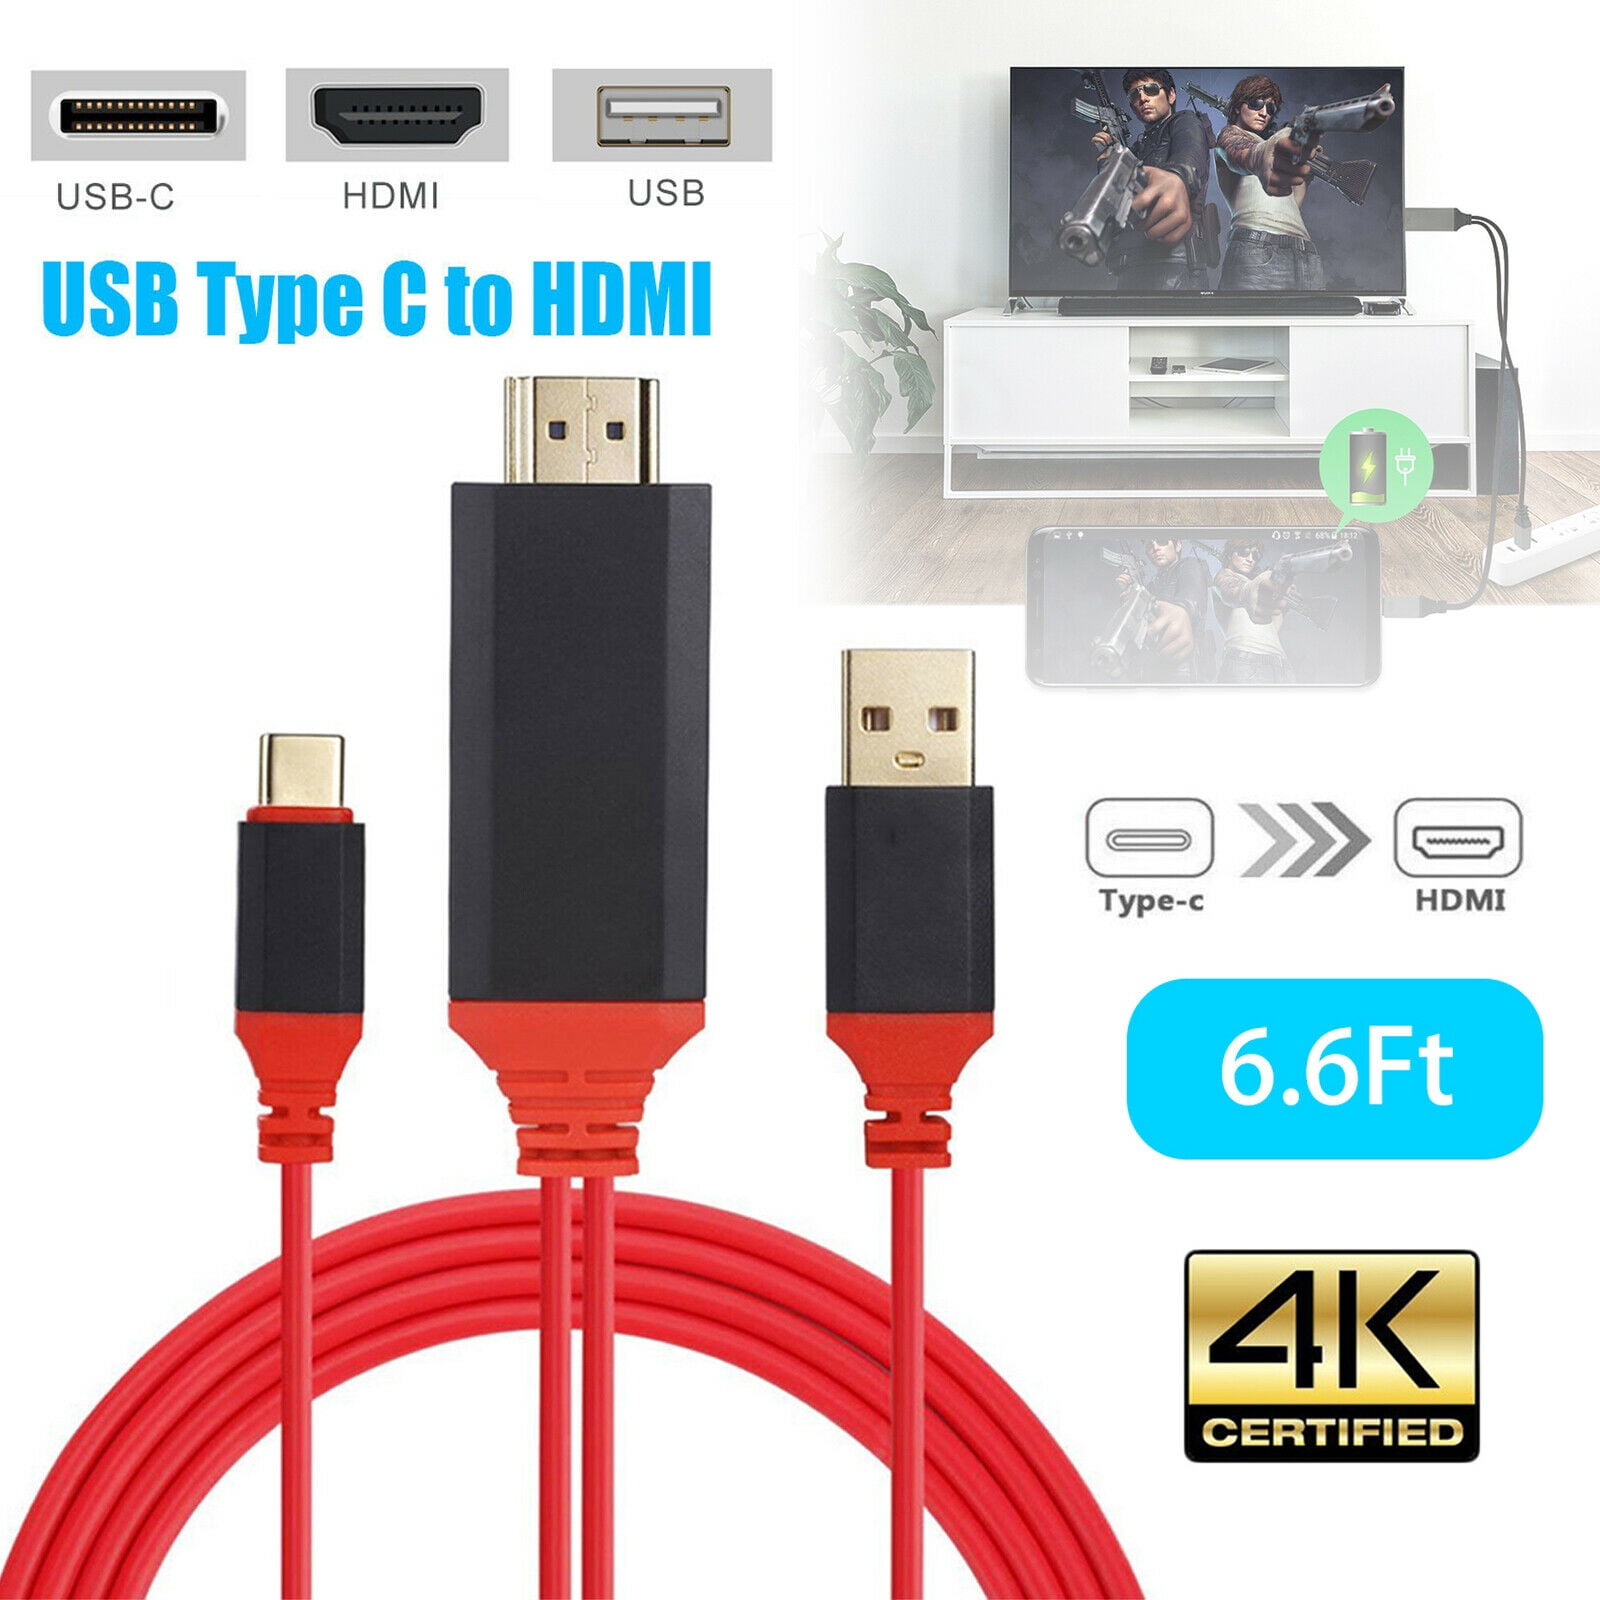 USB 3.1 Type-C HDMI HDTV Cable Adapter for Samsung Galaxy S10 S9 Note 8 C to HDMI Cable for Home Office - Walmart.com